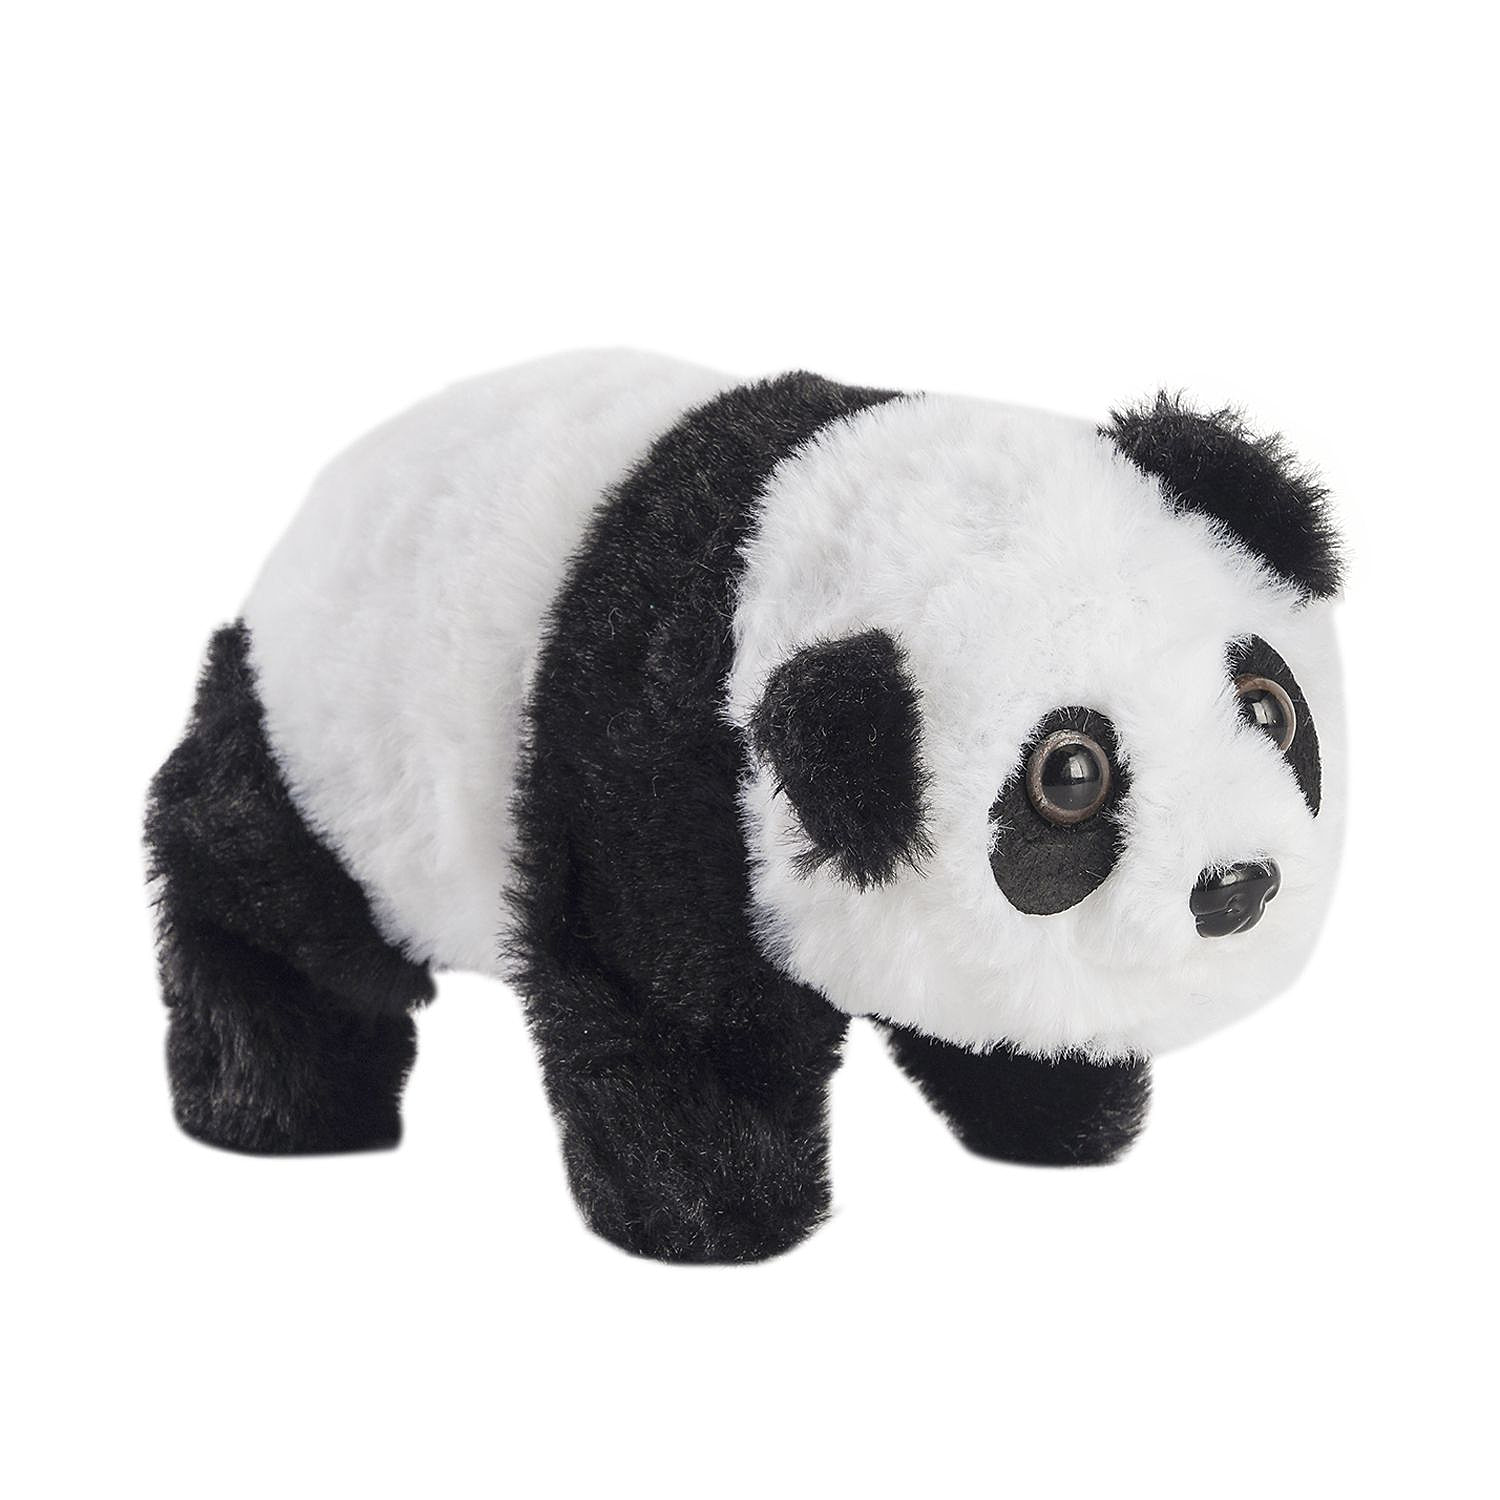 Electric Walking Plush Panda Toy - Black and White (Size 18x10x10 cm, 2 AA  Battery Not Included)